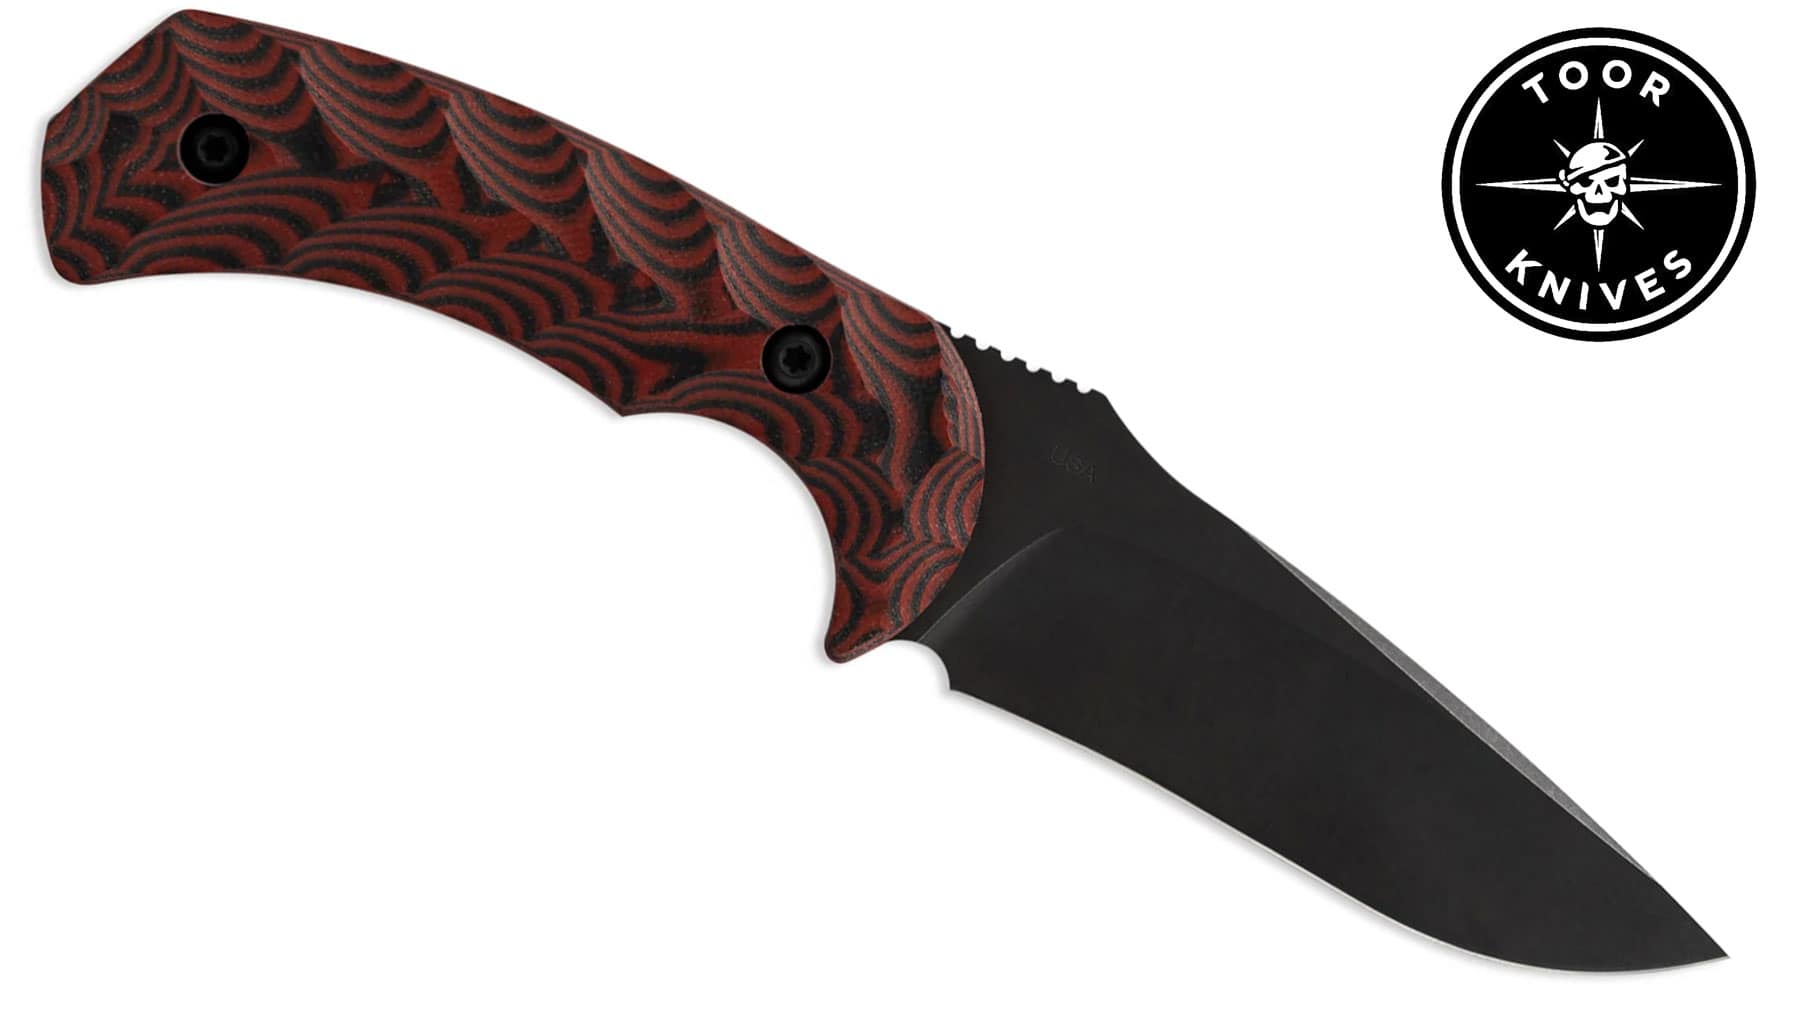 Toor Knives is based in Southern California.